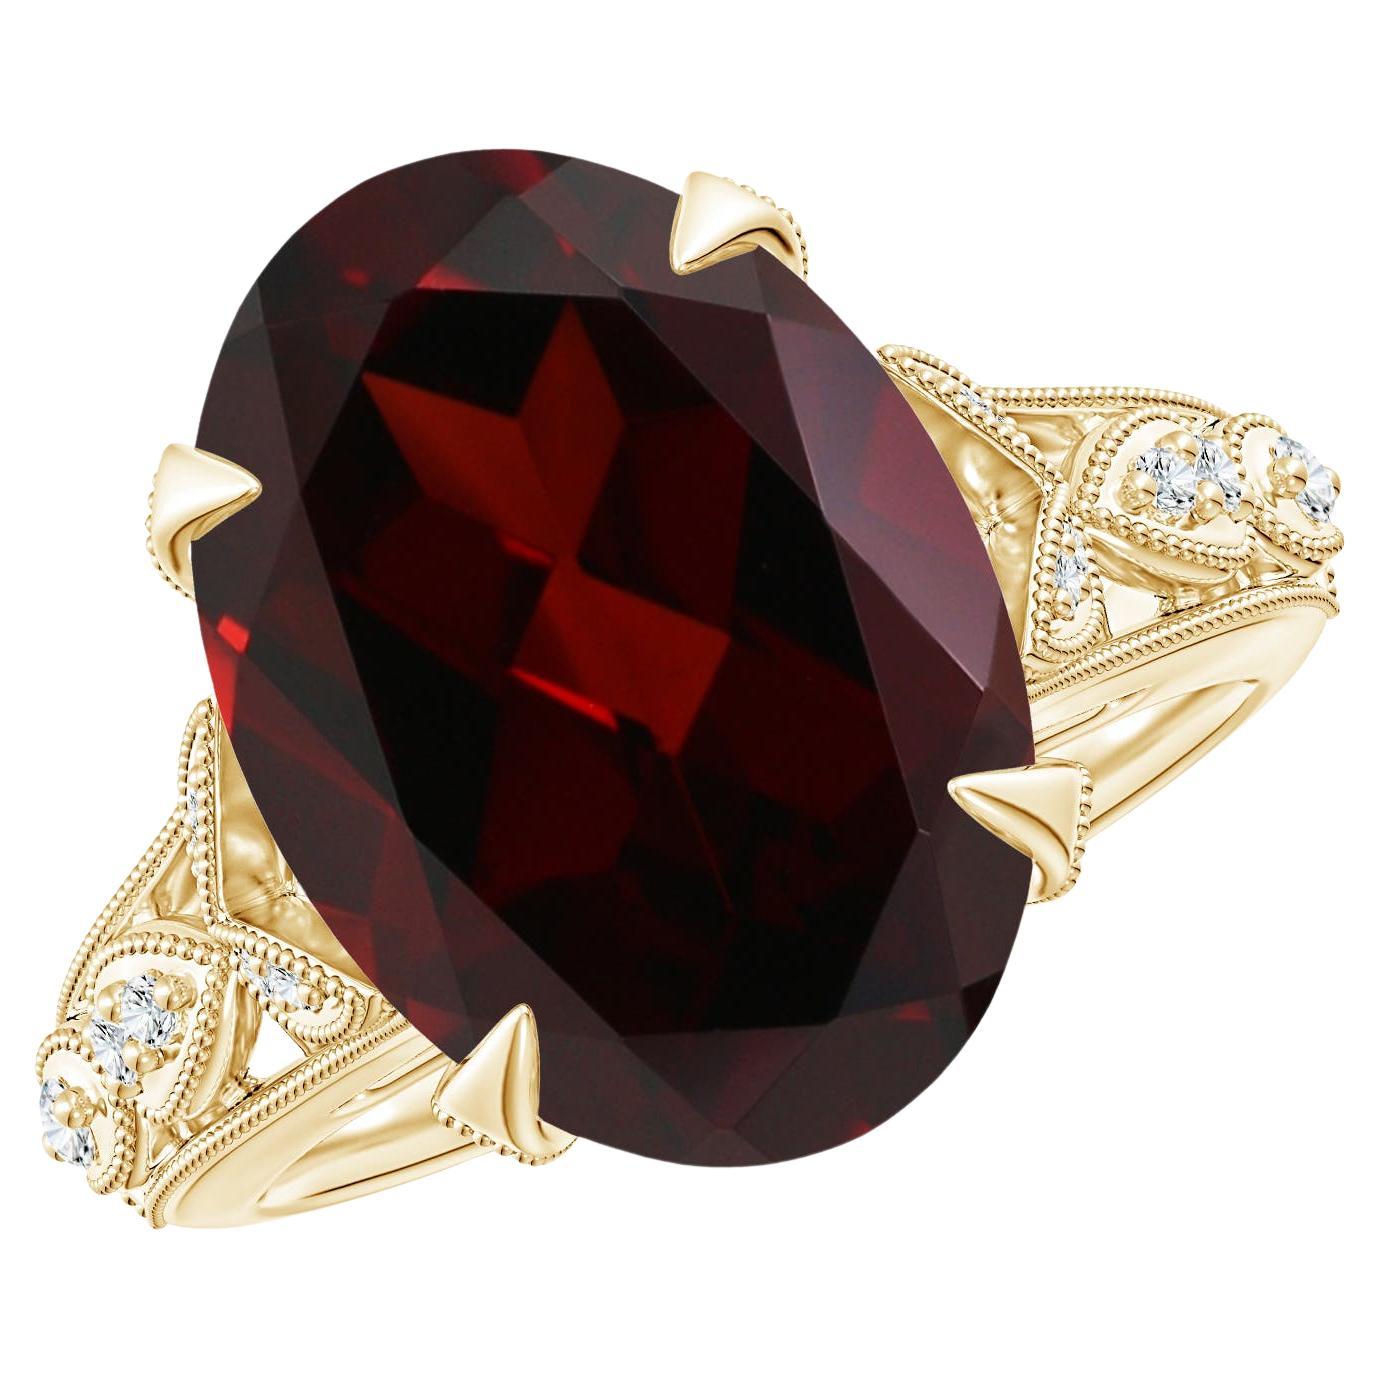 For Sale:  GIA Certified Natural Vintage Style Garnet Fleur De Lis Yellow Gold Ring